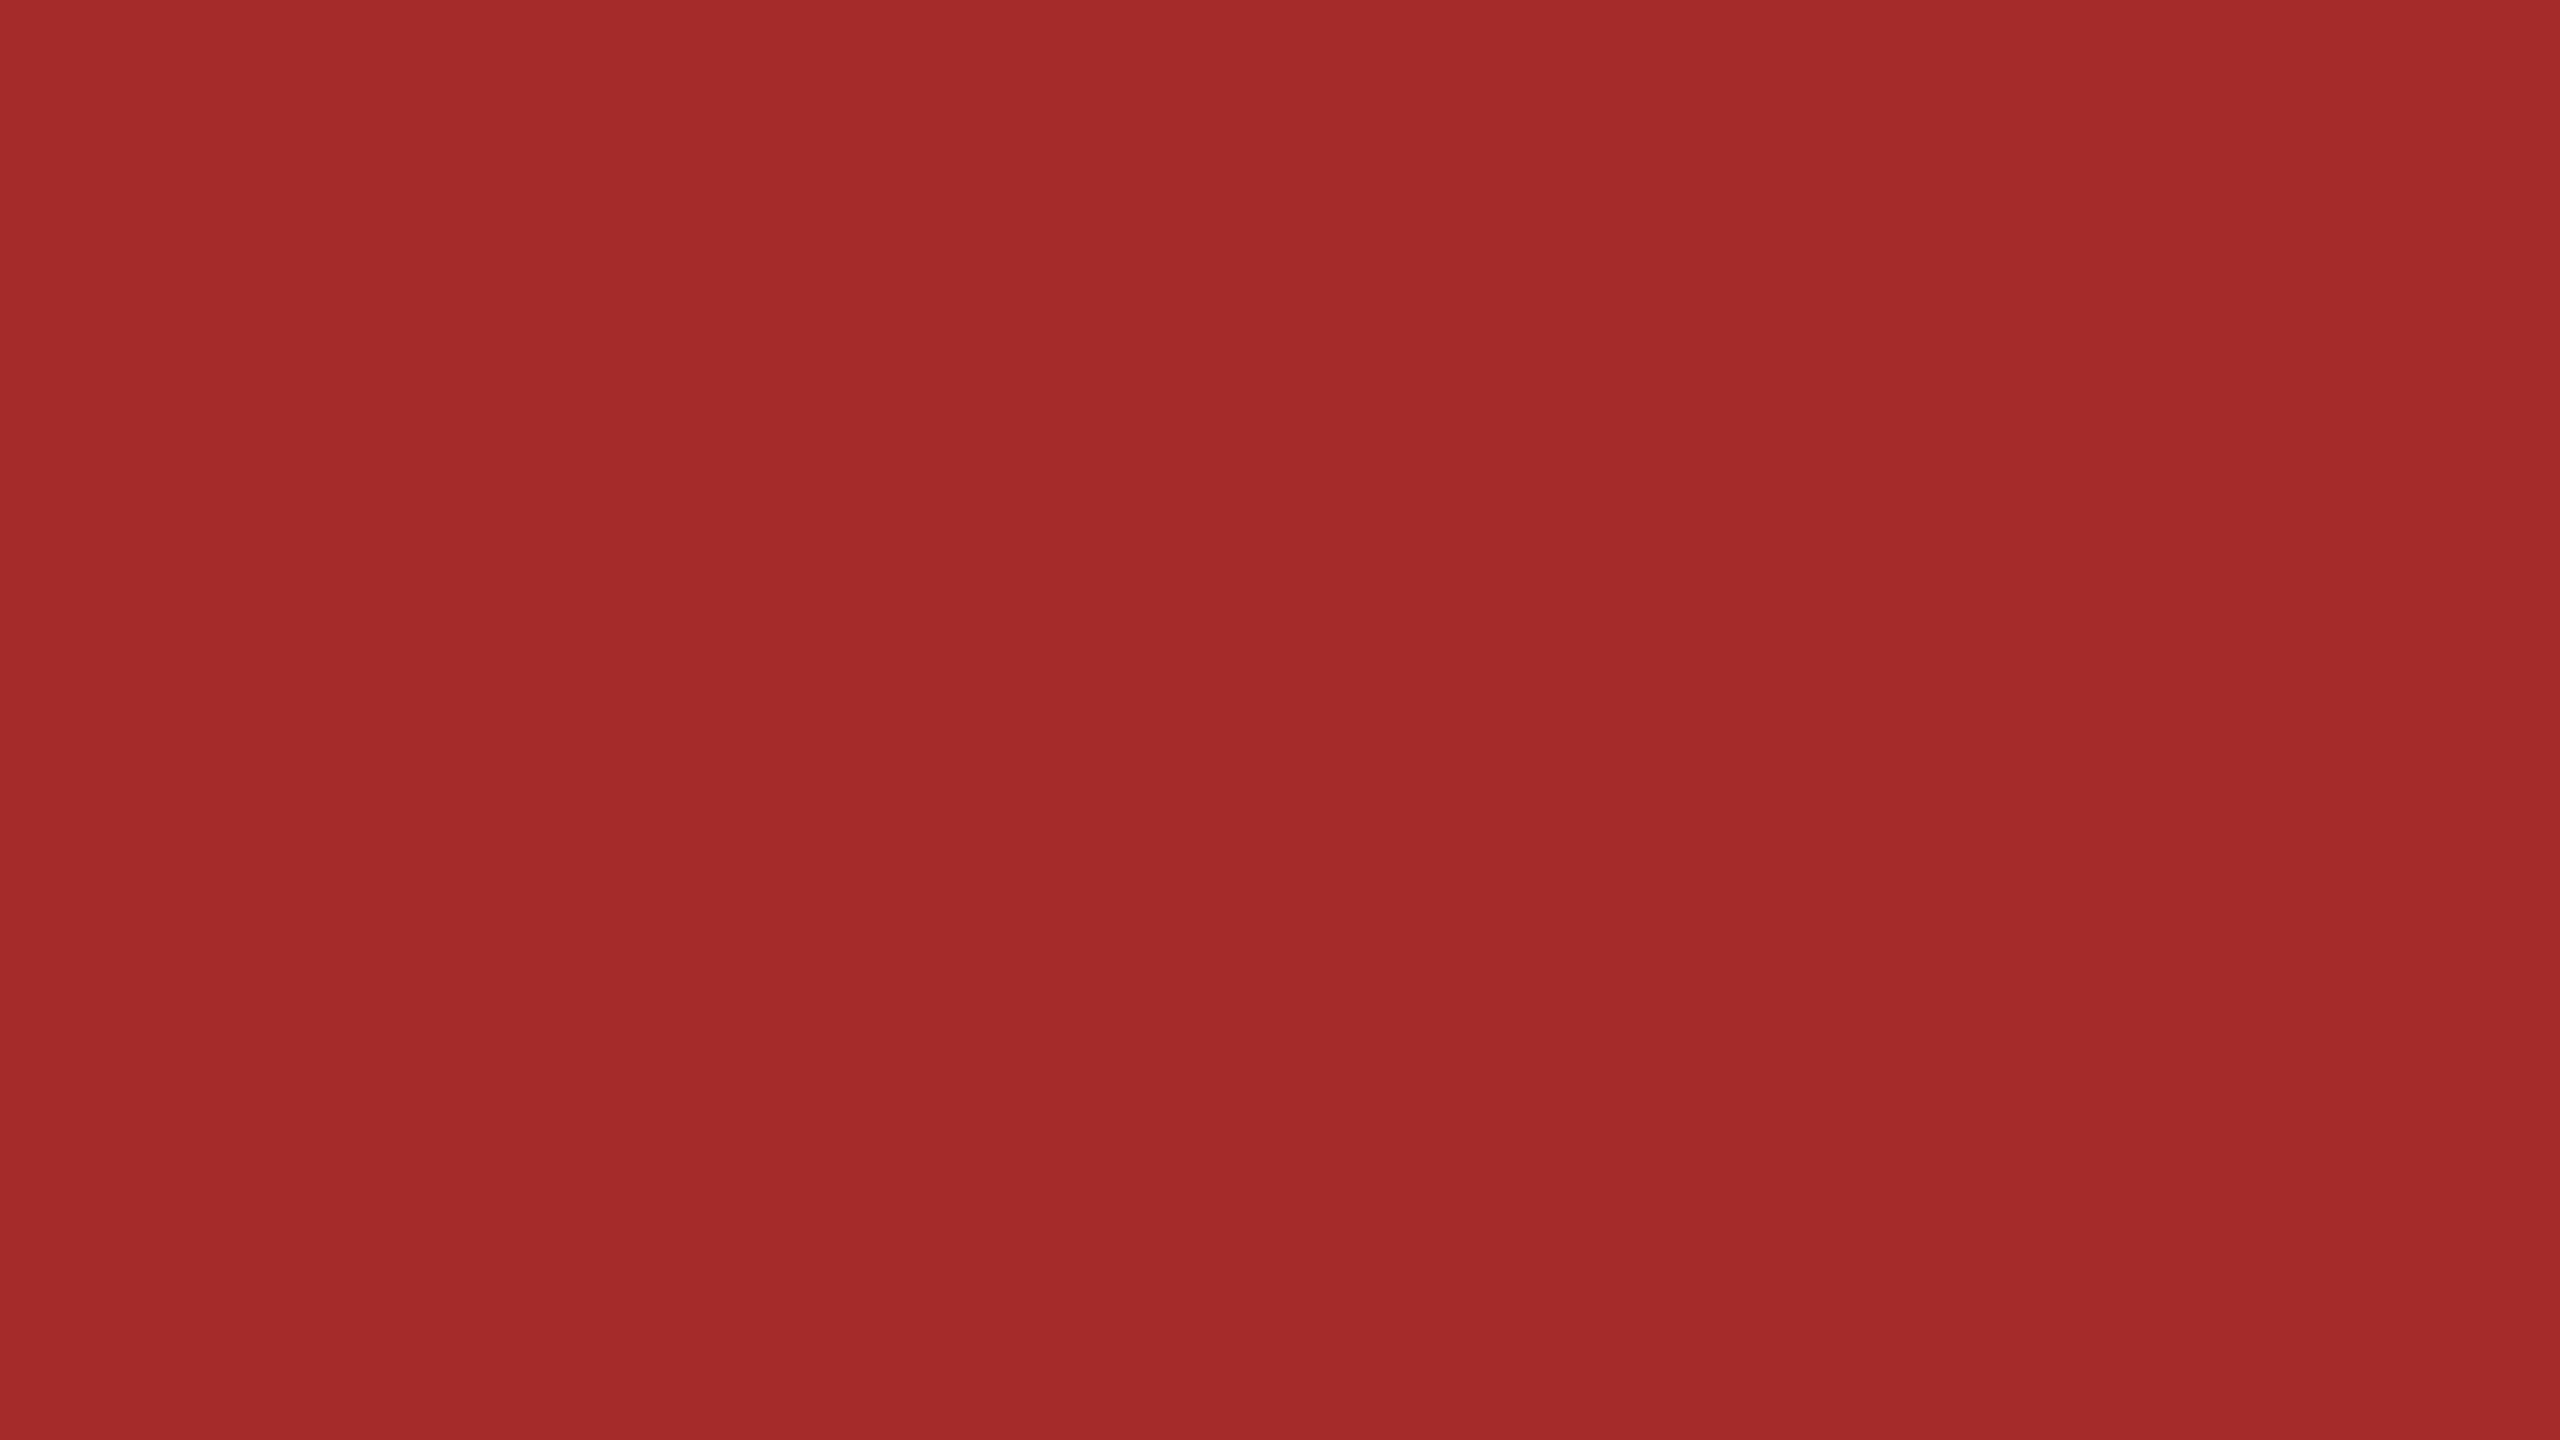 Resolution Red Brown Solid Color Background And